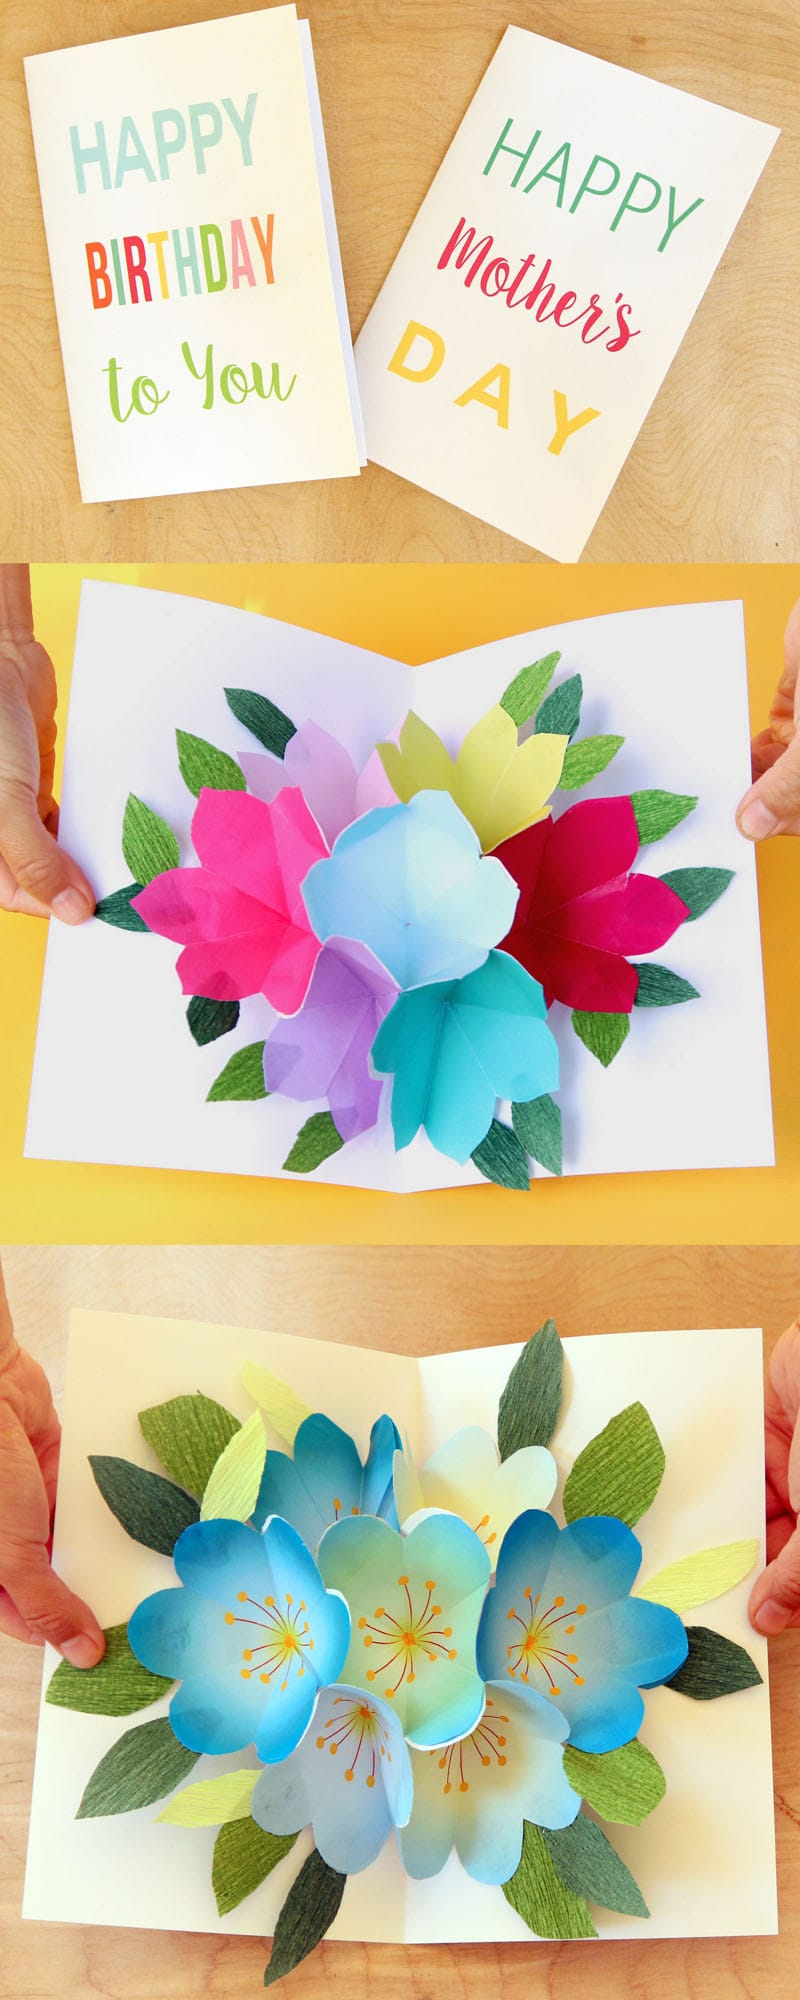 Free Printable Happy Birthday Card With Pop Up Bouquet - A Piece Of - Create Greeting Cards Online Free Printable